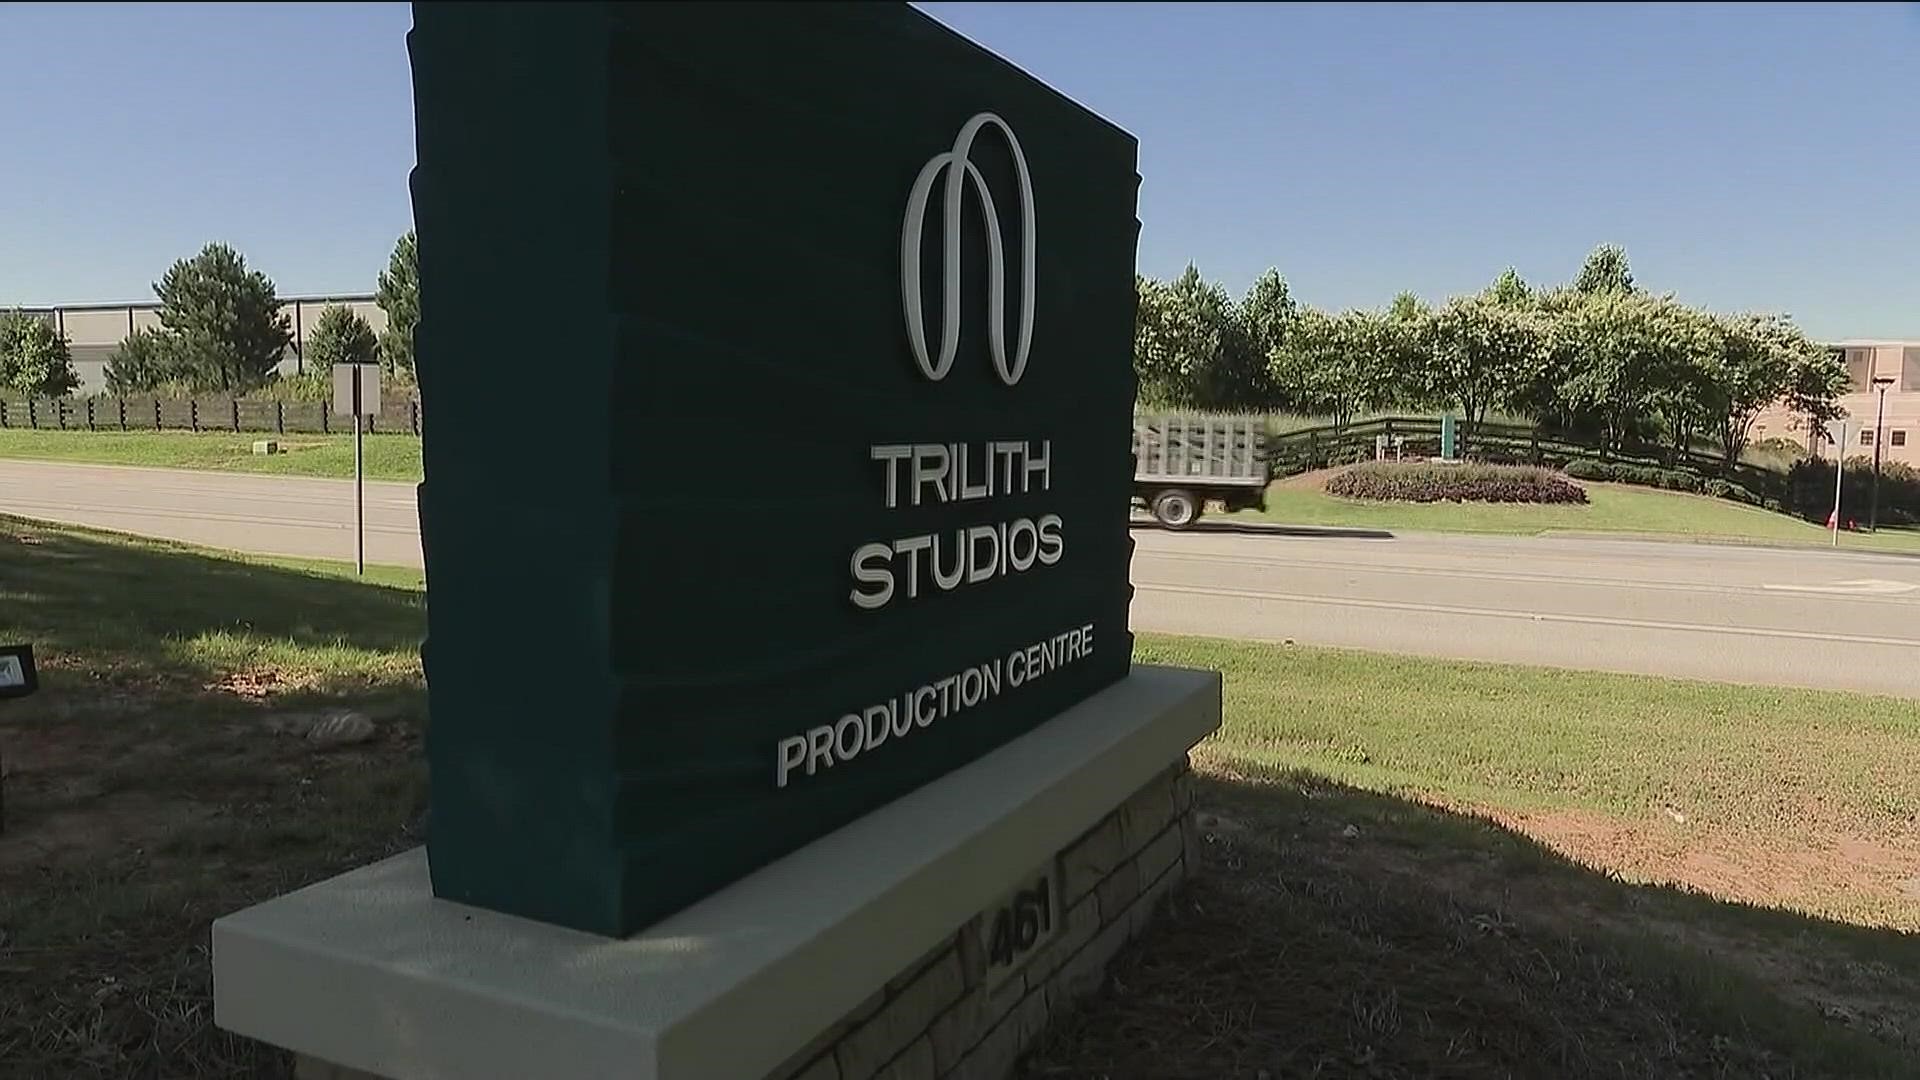 The company's studio, formerly known as Pinewood Atlanta Studios, served as the home for cast and crew who worked on "Avengers Endgame."